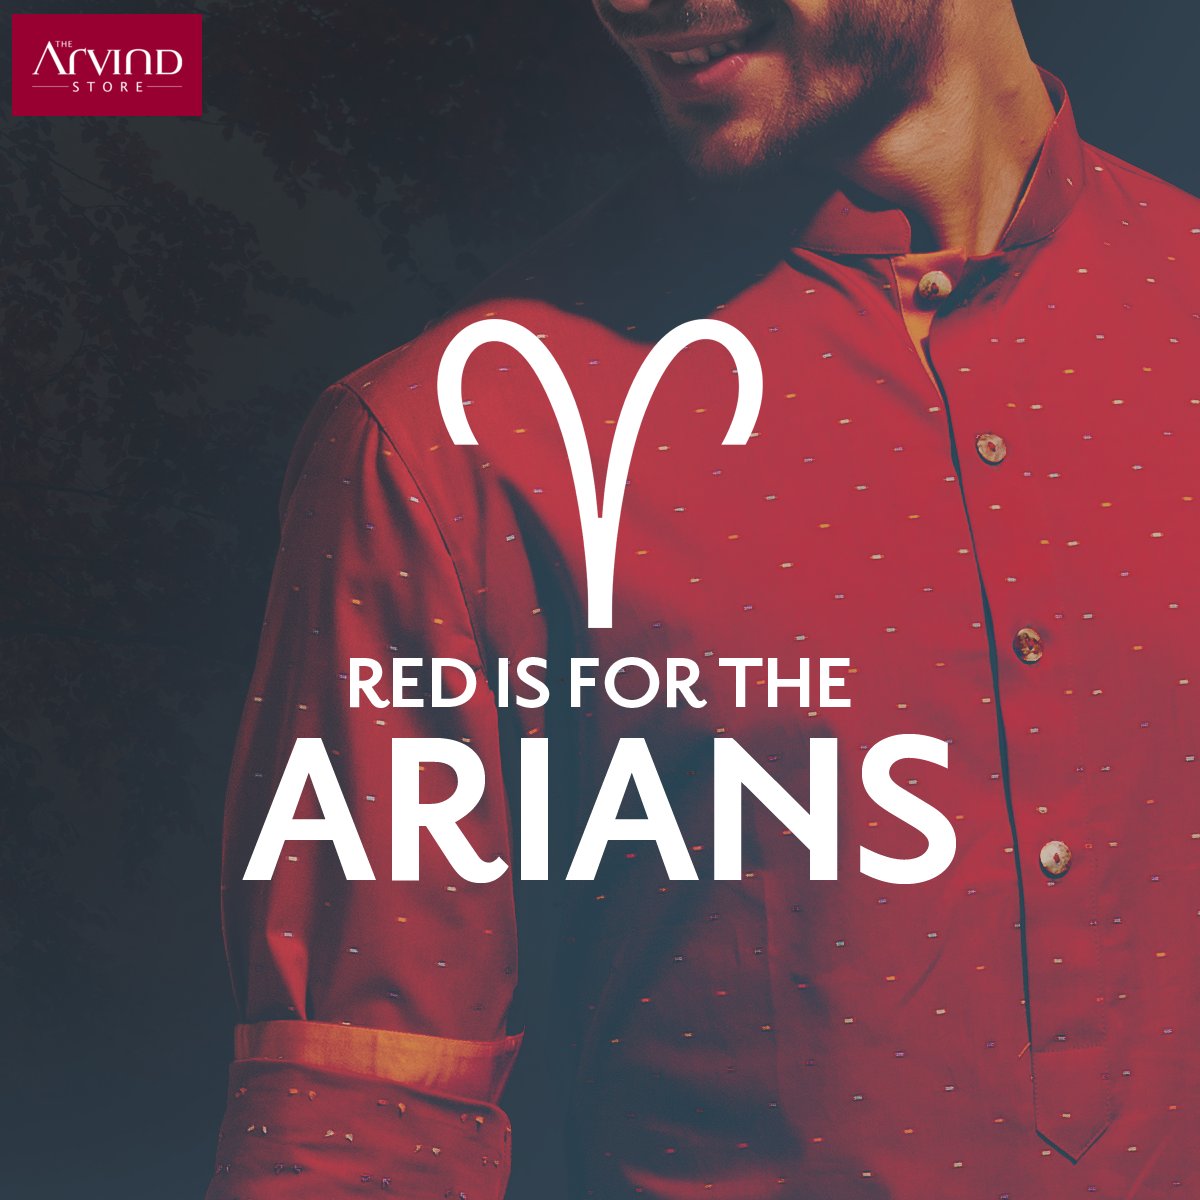 Always high on energy &  on lookout for something new, Red is just the colour to meet your energetic demands. https://t.co/vkED9hIQsT